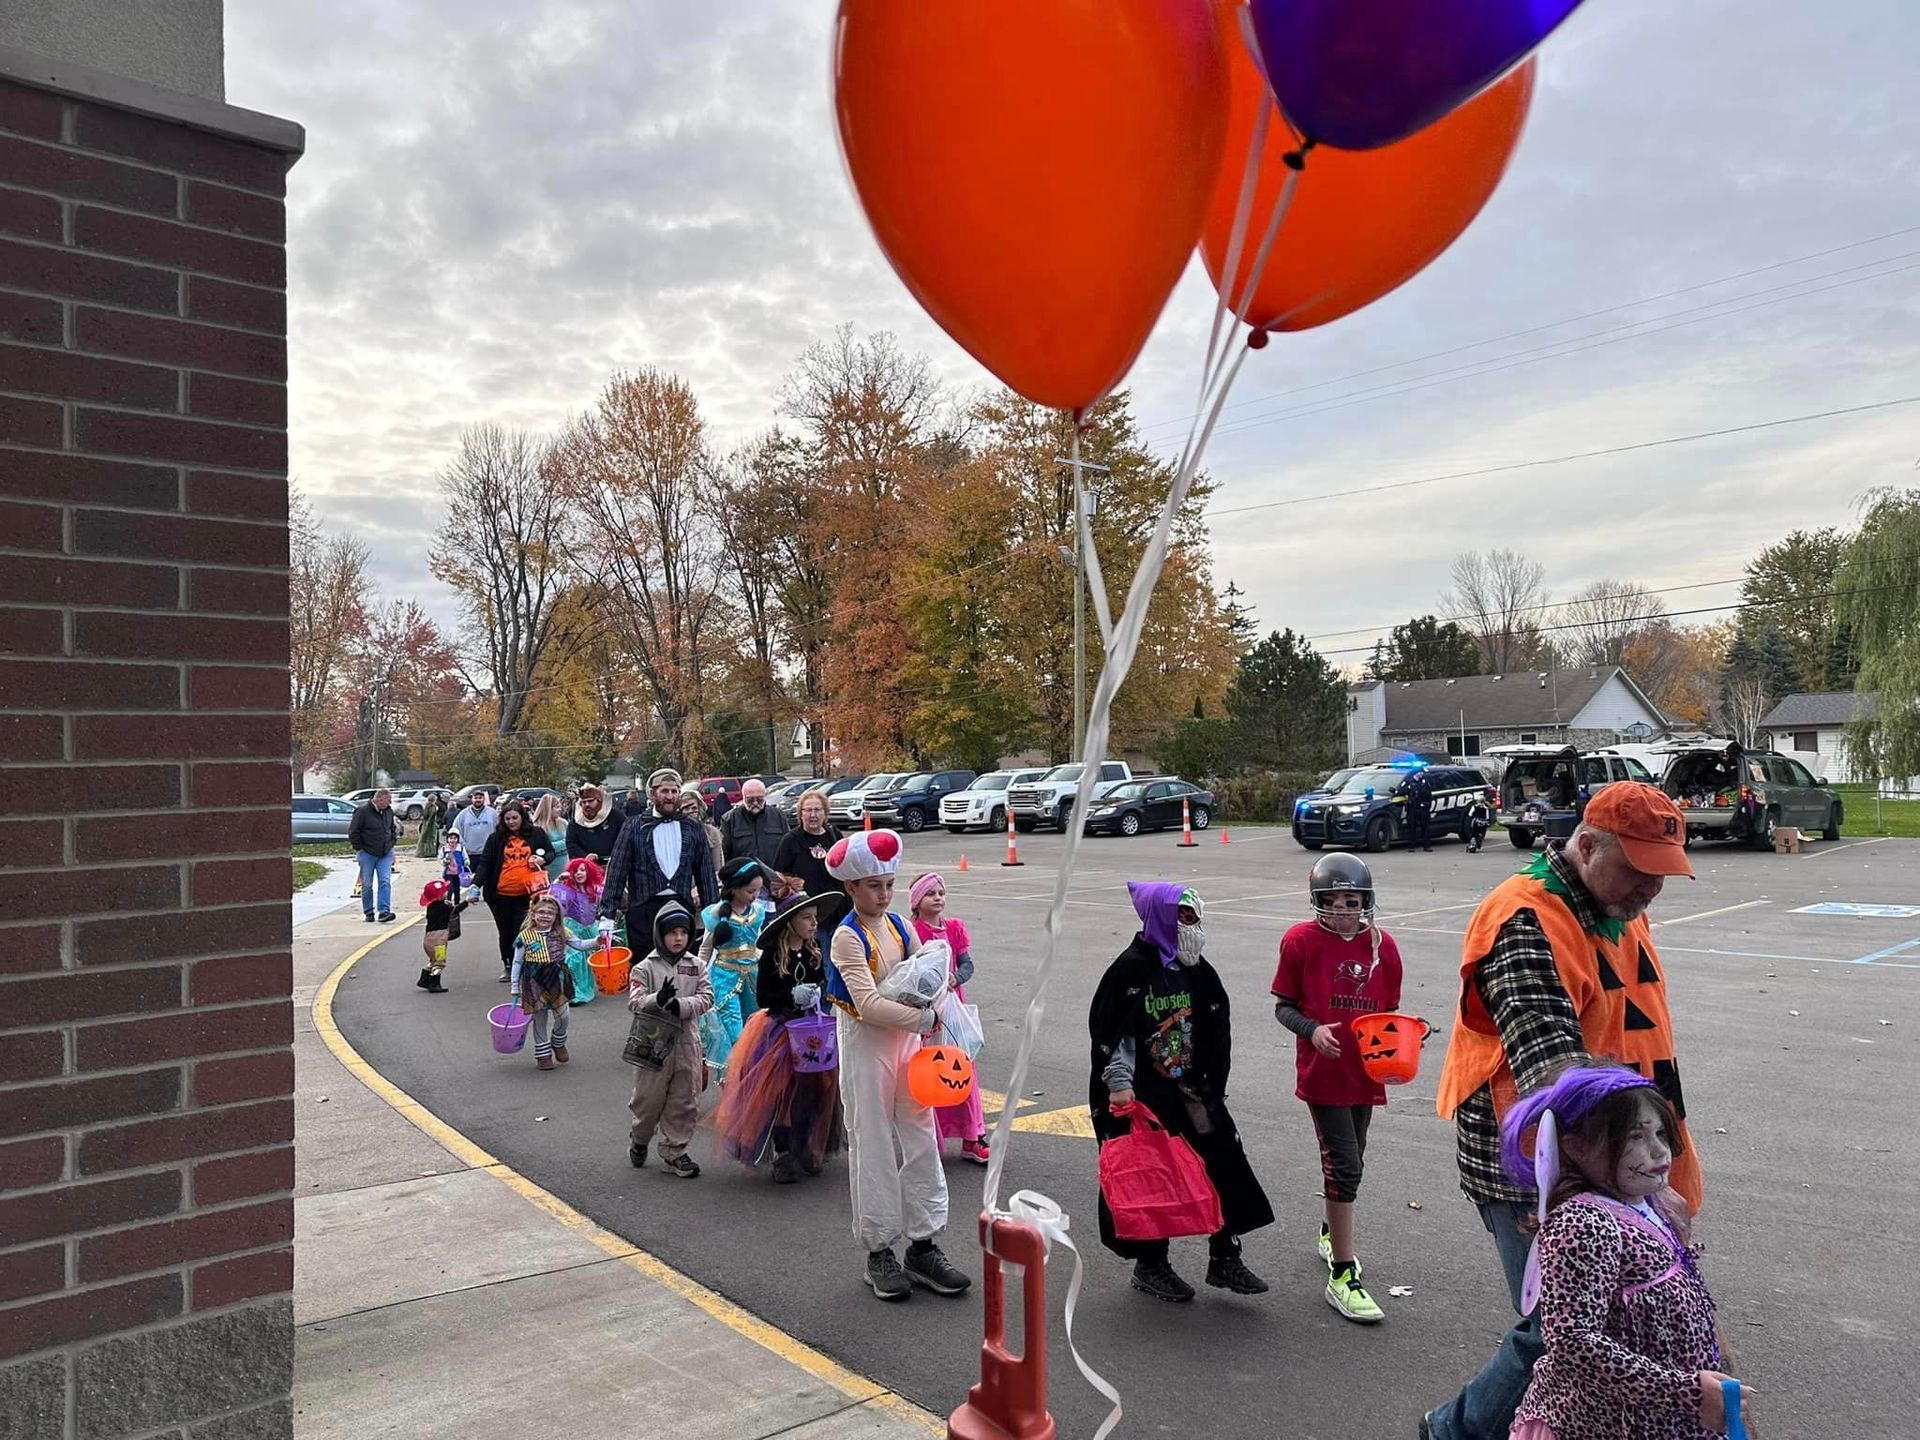 A group of children and parents in Halloween costumes walking towards the school.